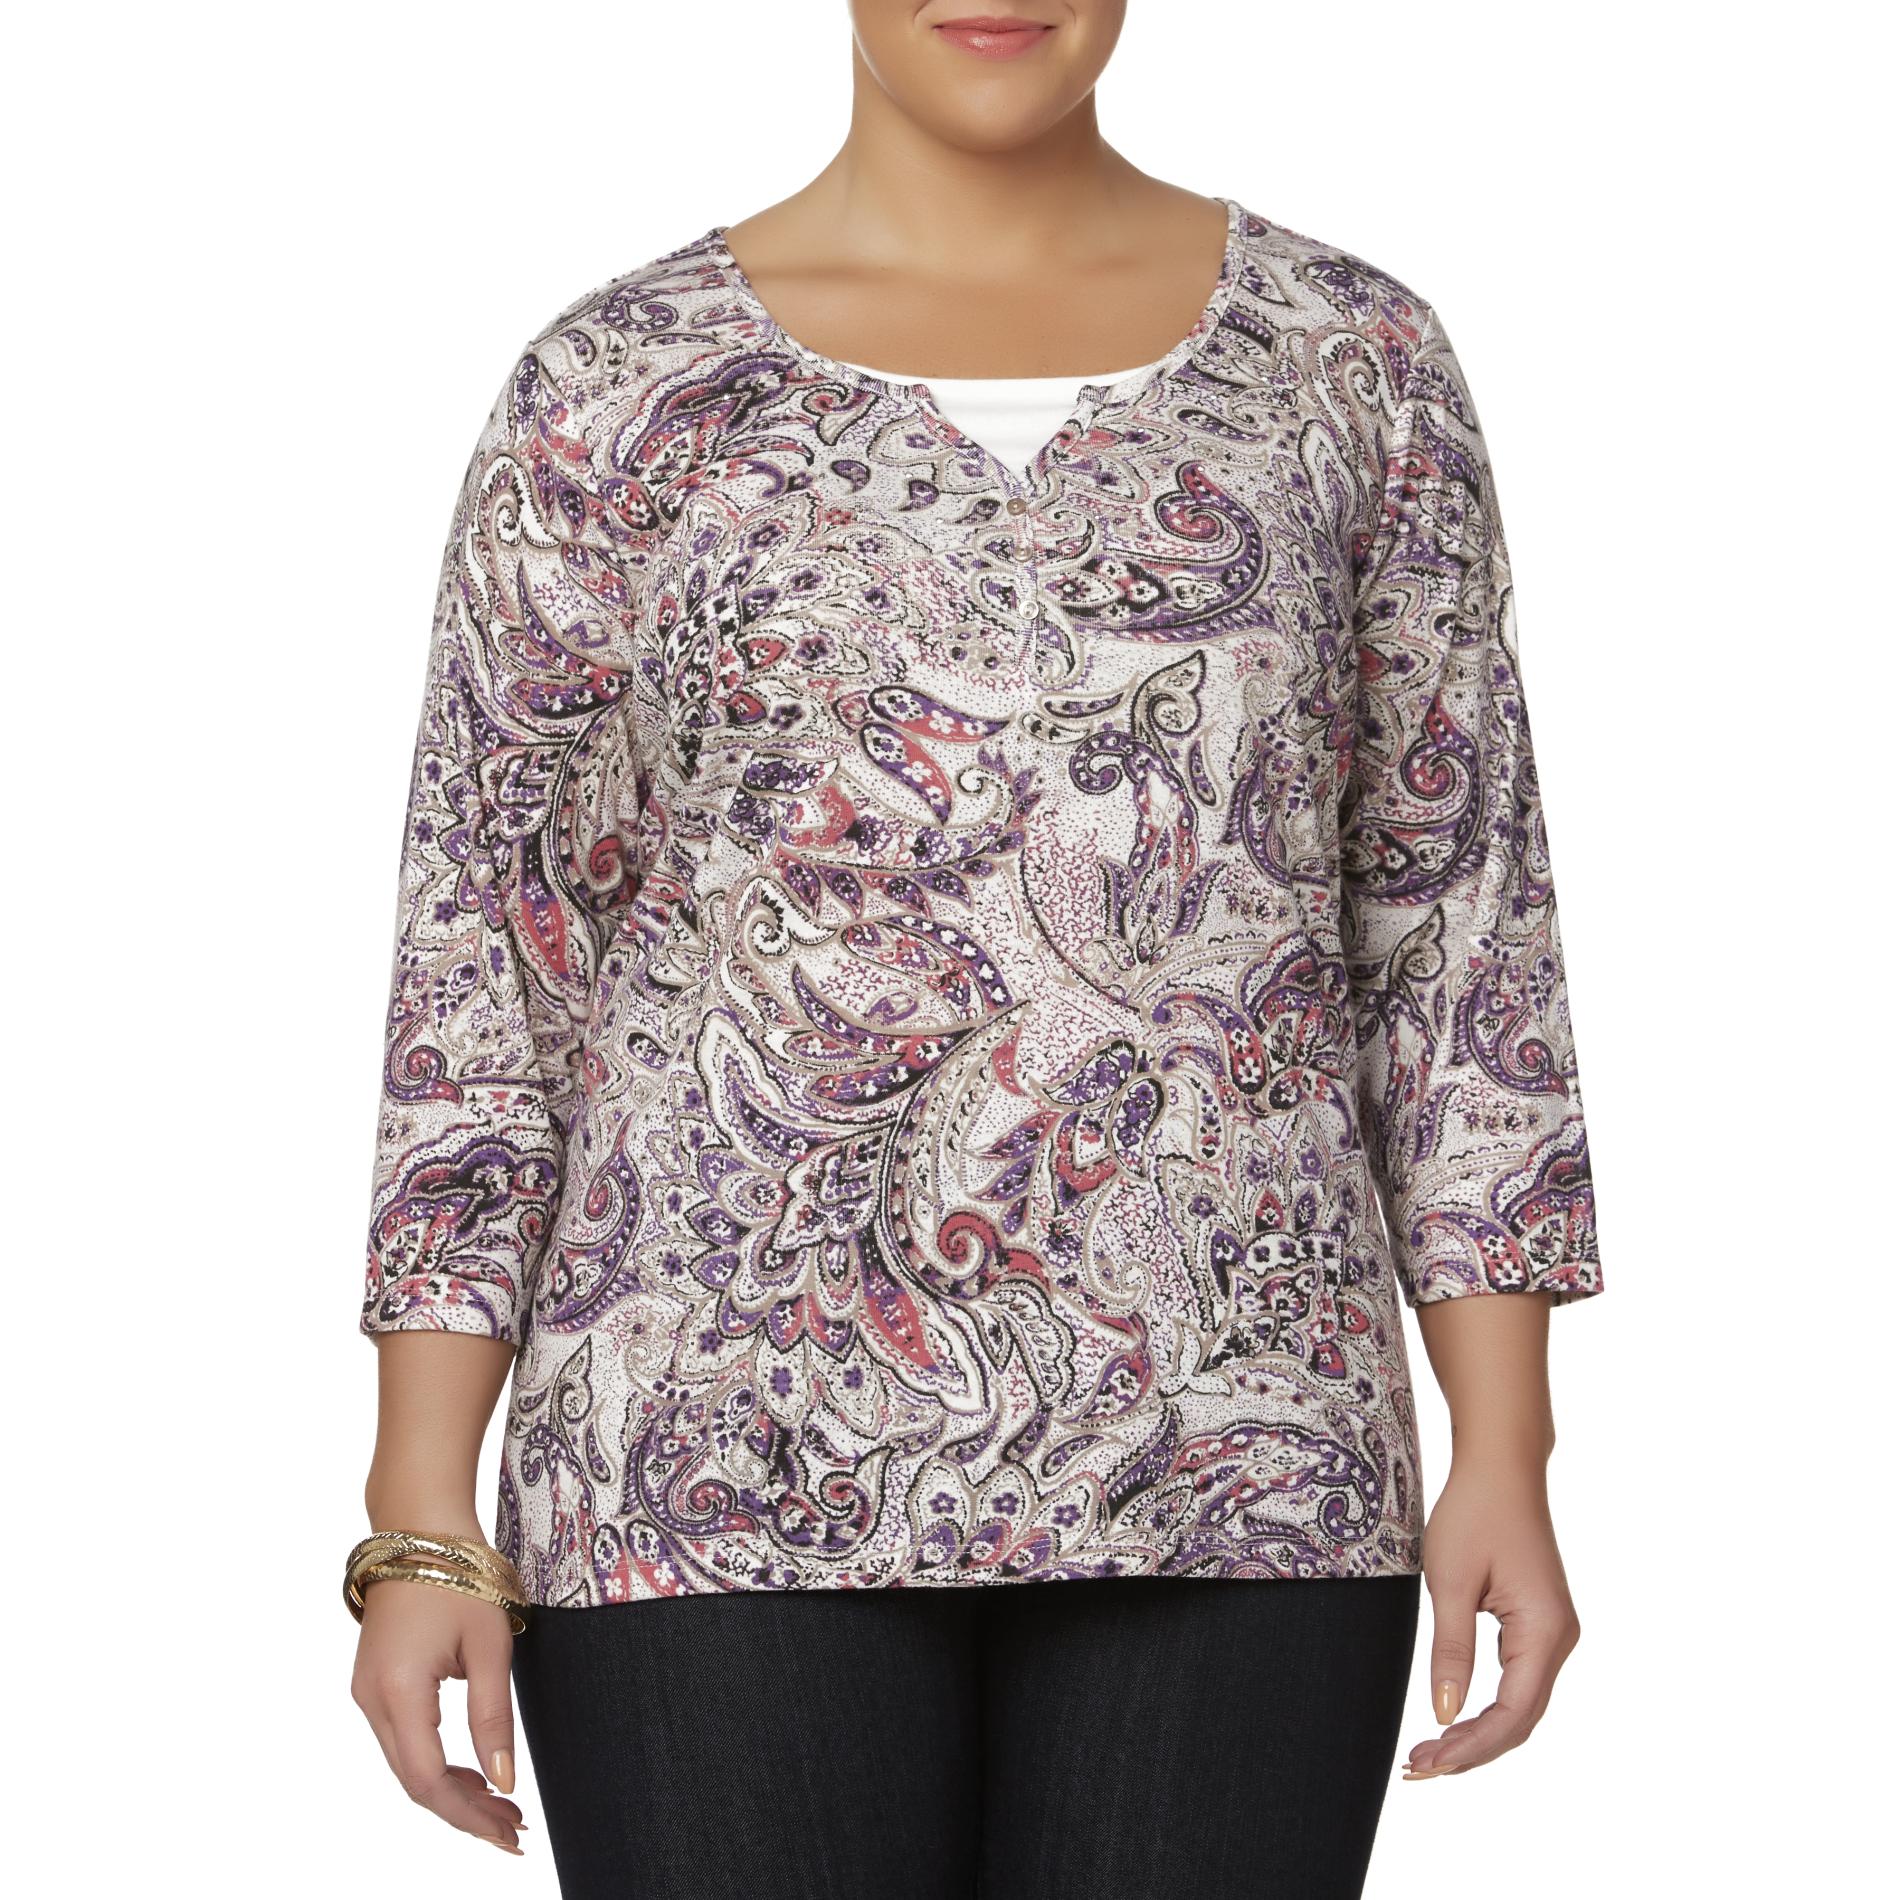 Basic Editions Women's Plus Layered-Look Top - Paisley